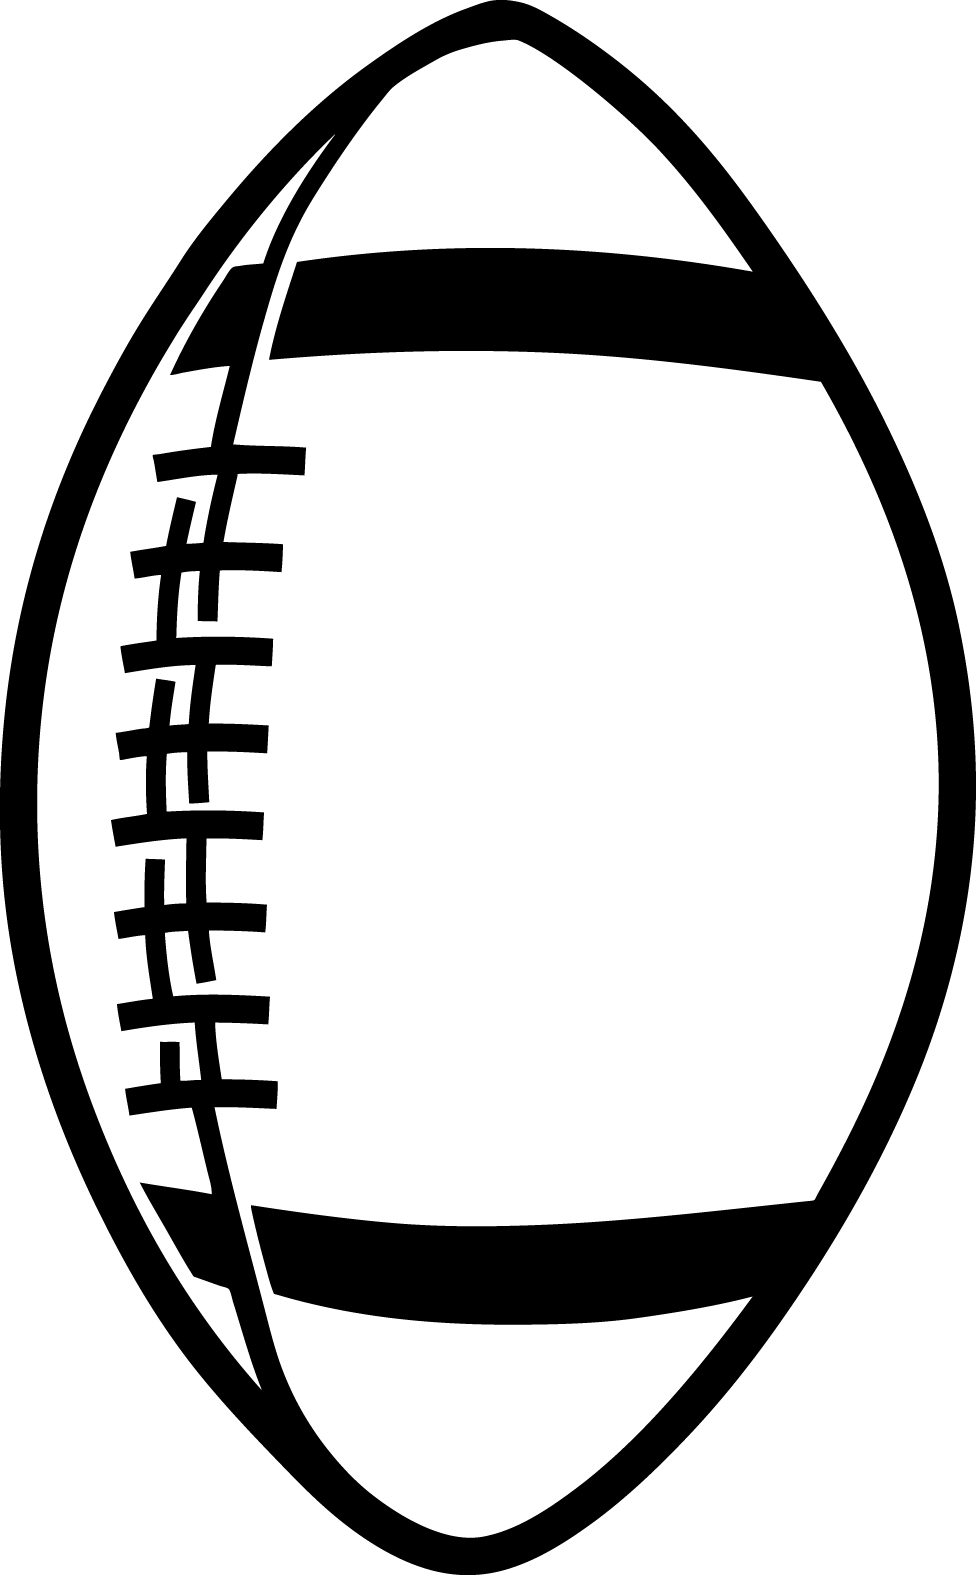 Black and White Football Logo - Football clip black and white download white